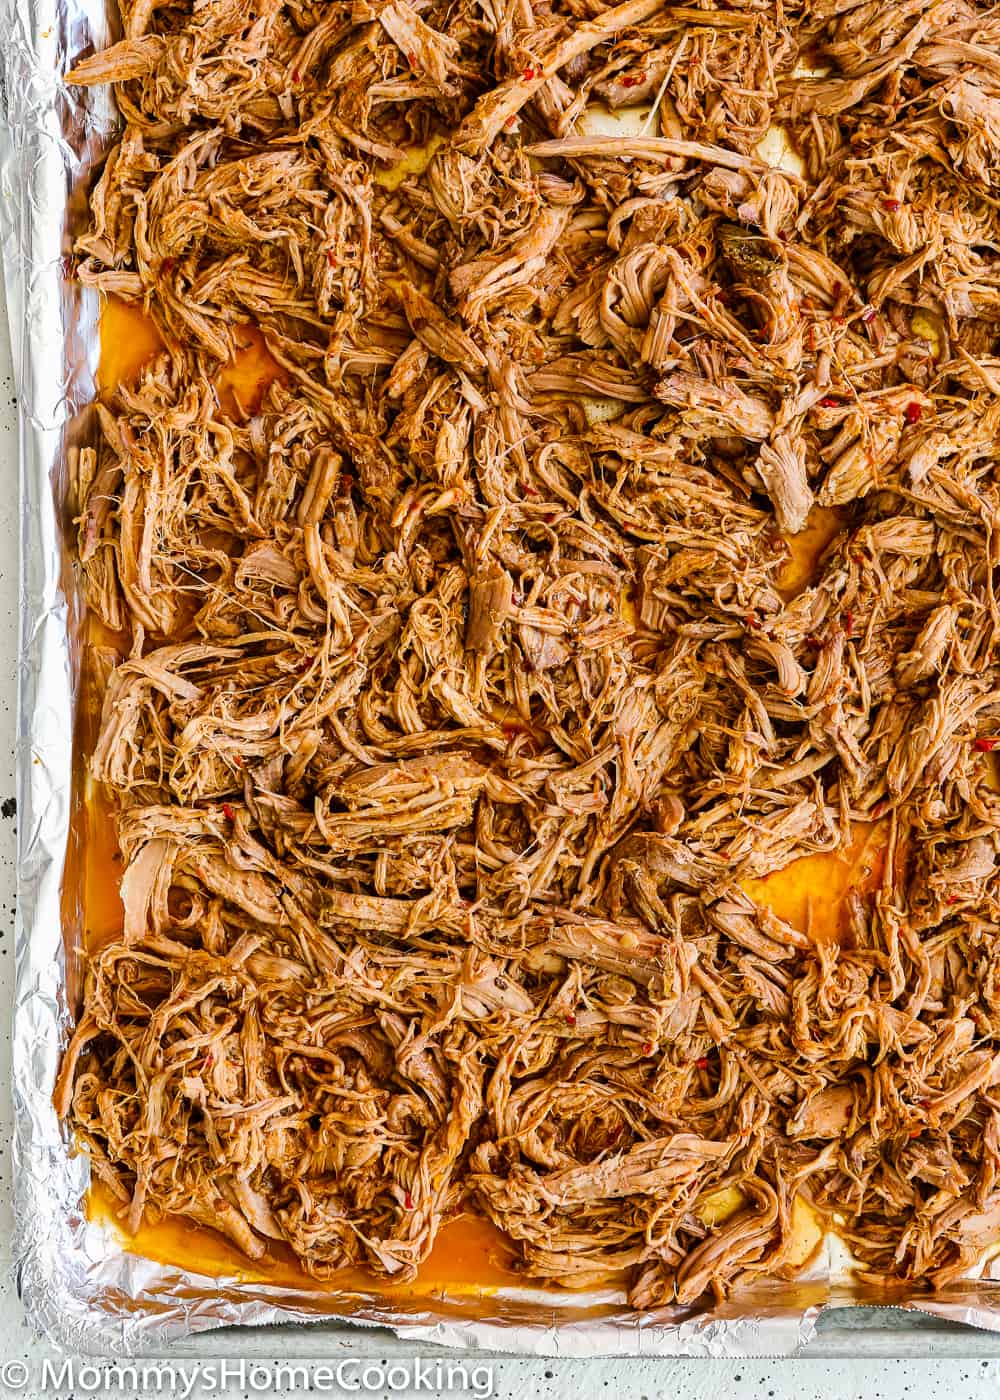 shredded pork shoulder with chipotle sauce in a a baking sheet.